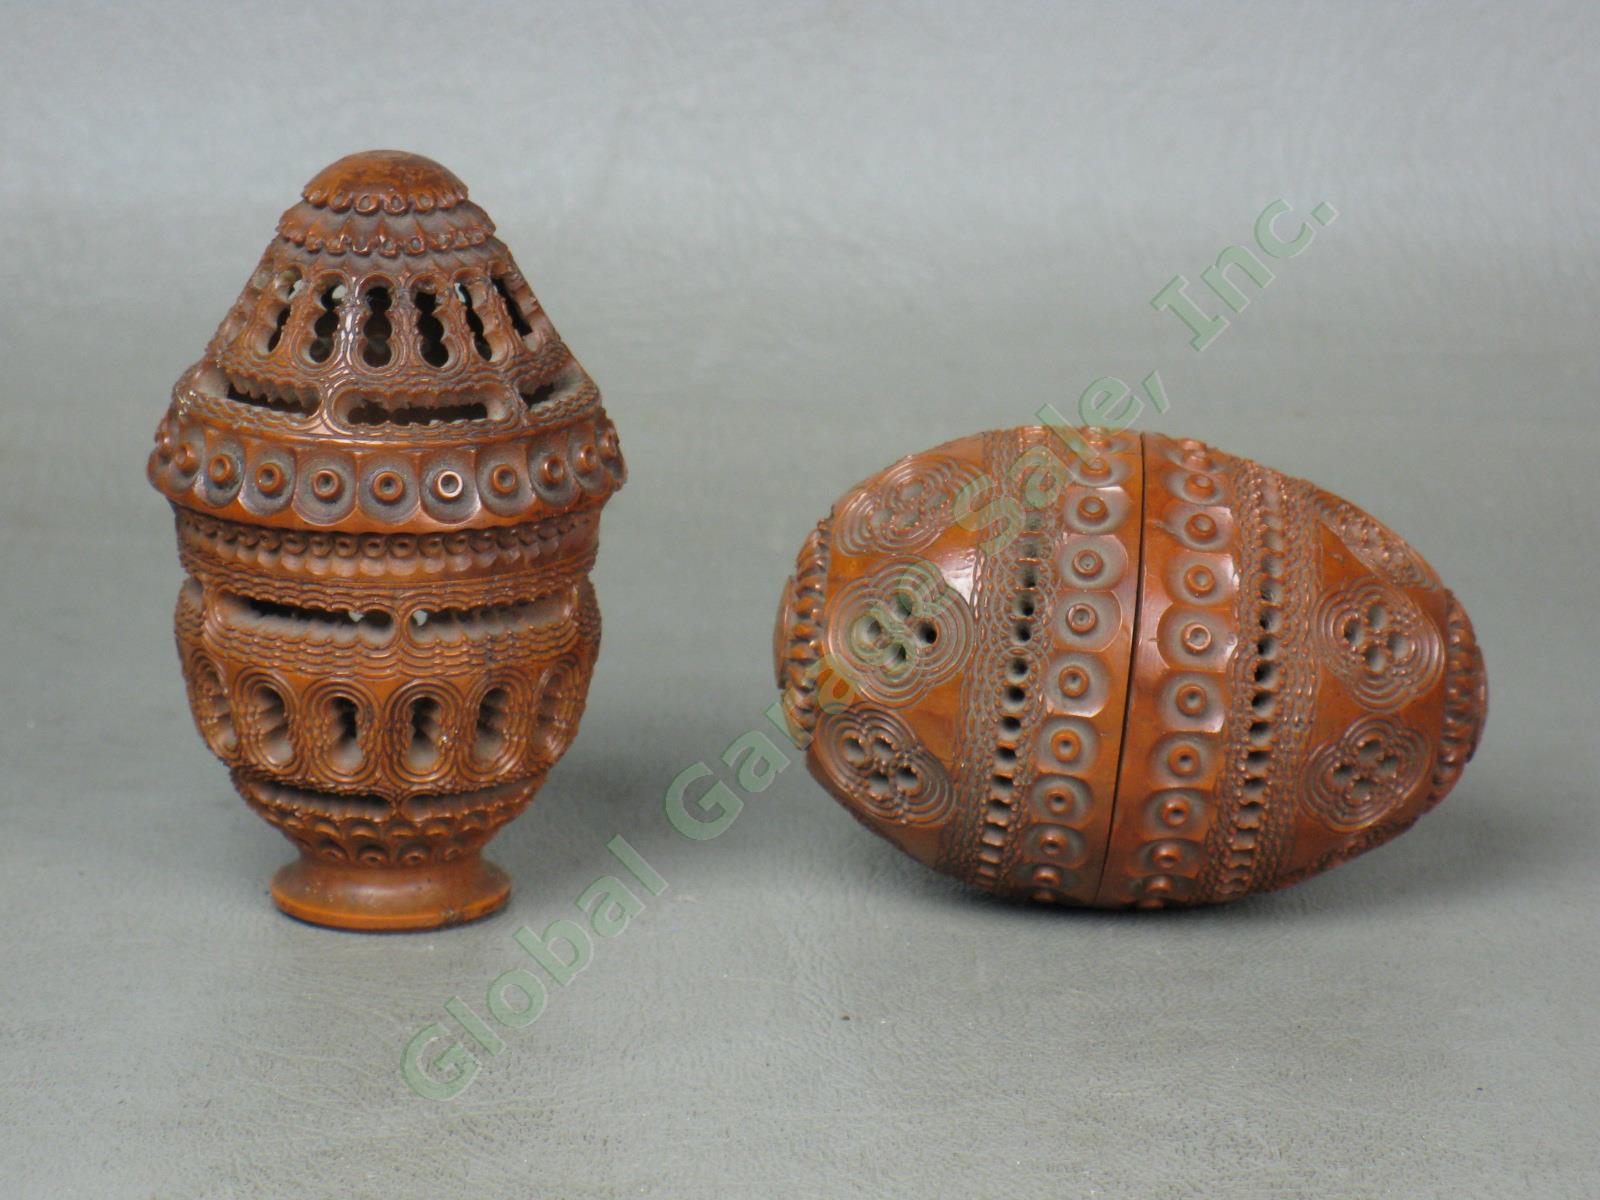 2 Vtg Antique Carved Coquilla Nut Eggs Sewing Thimble Needle Case Etui Lot NR!